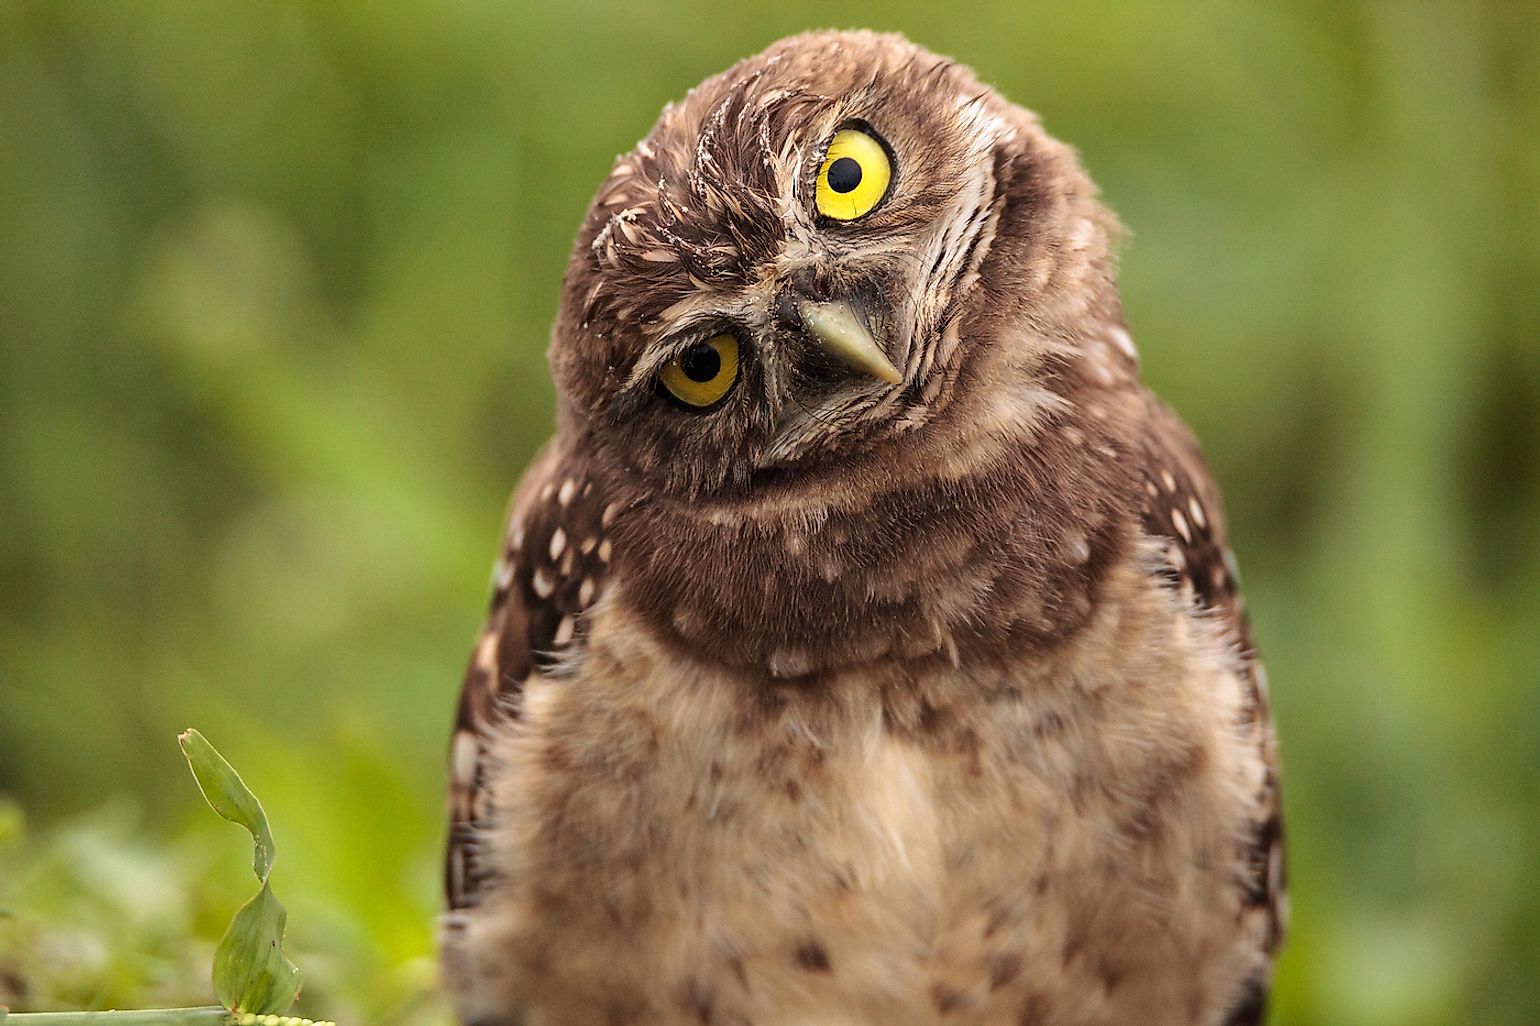 The Three Crticially Endangered Species of Owls - WorldAtlas